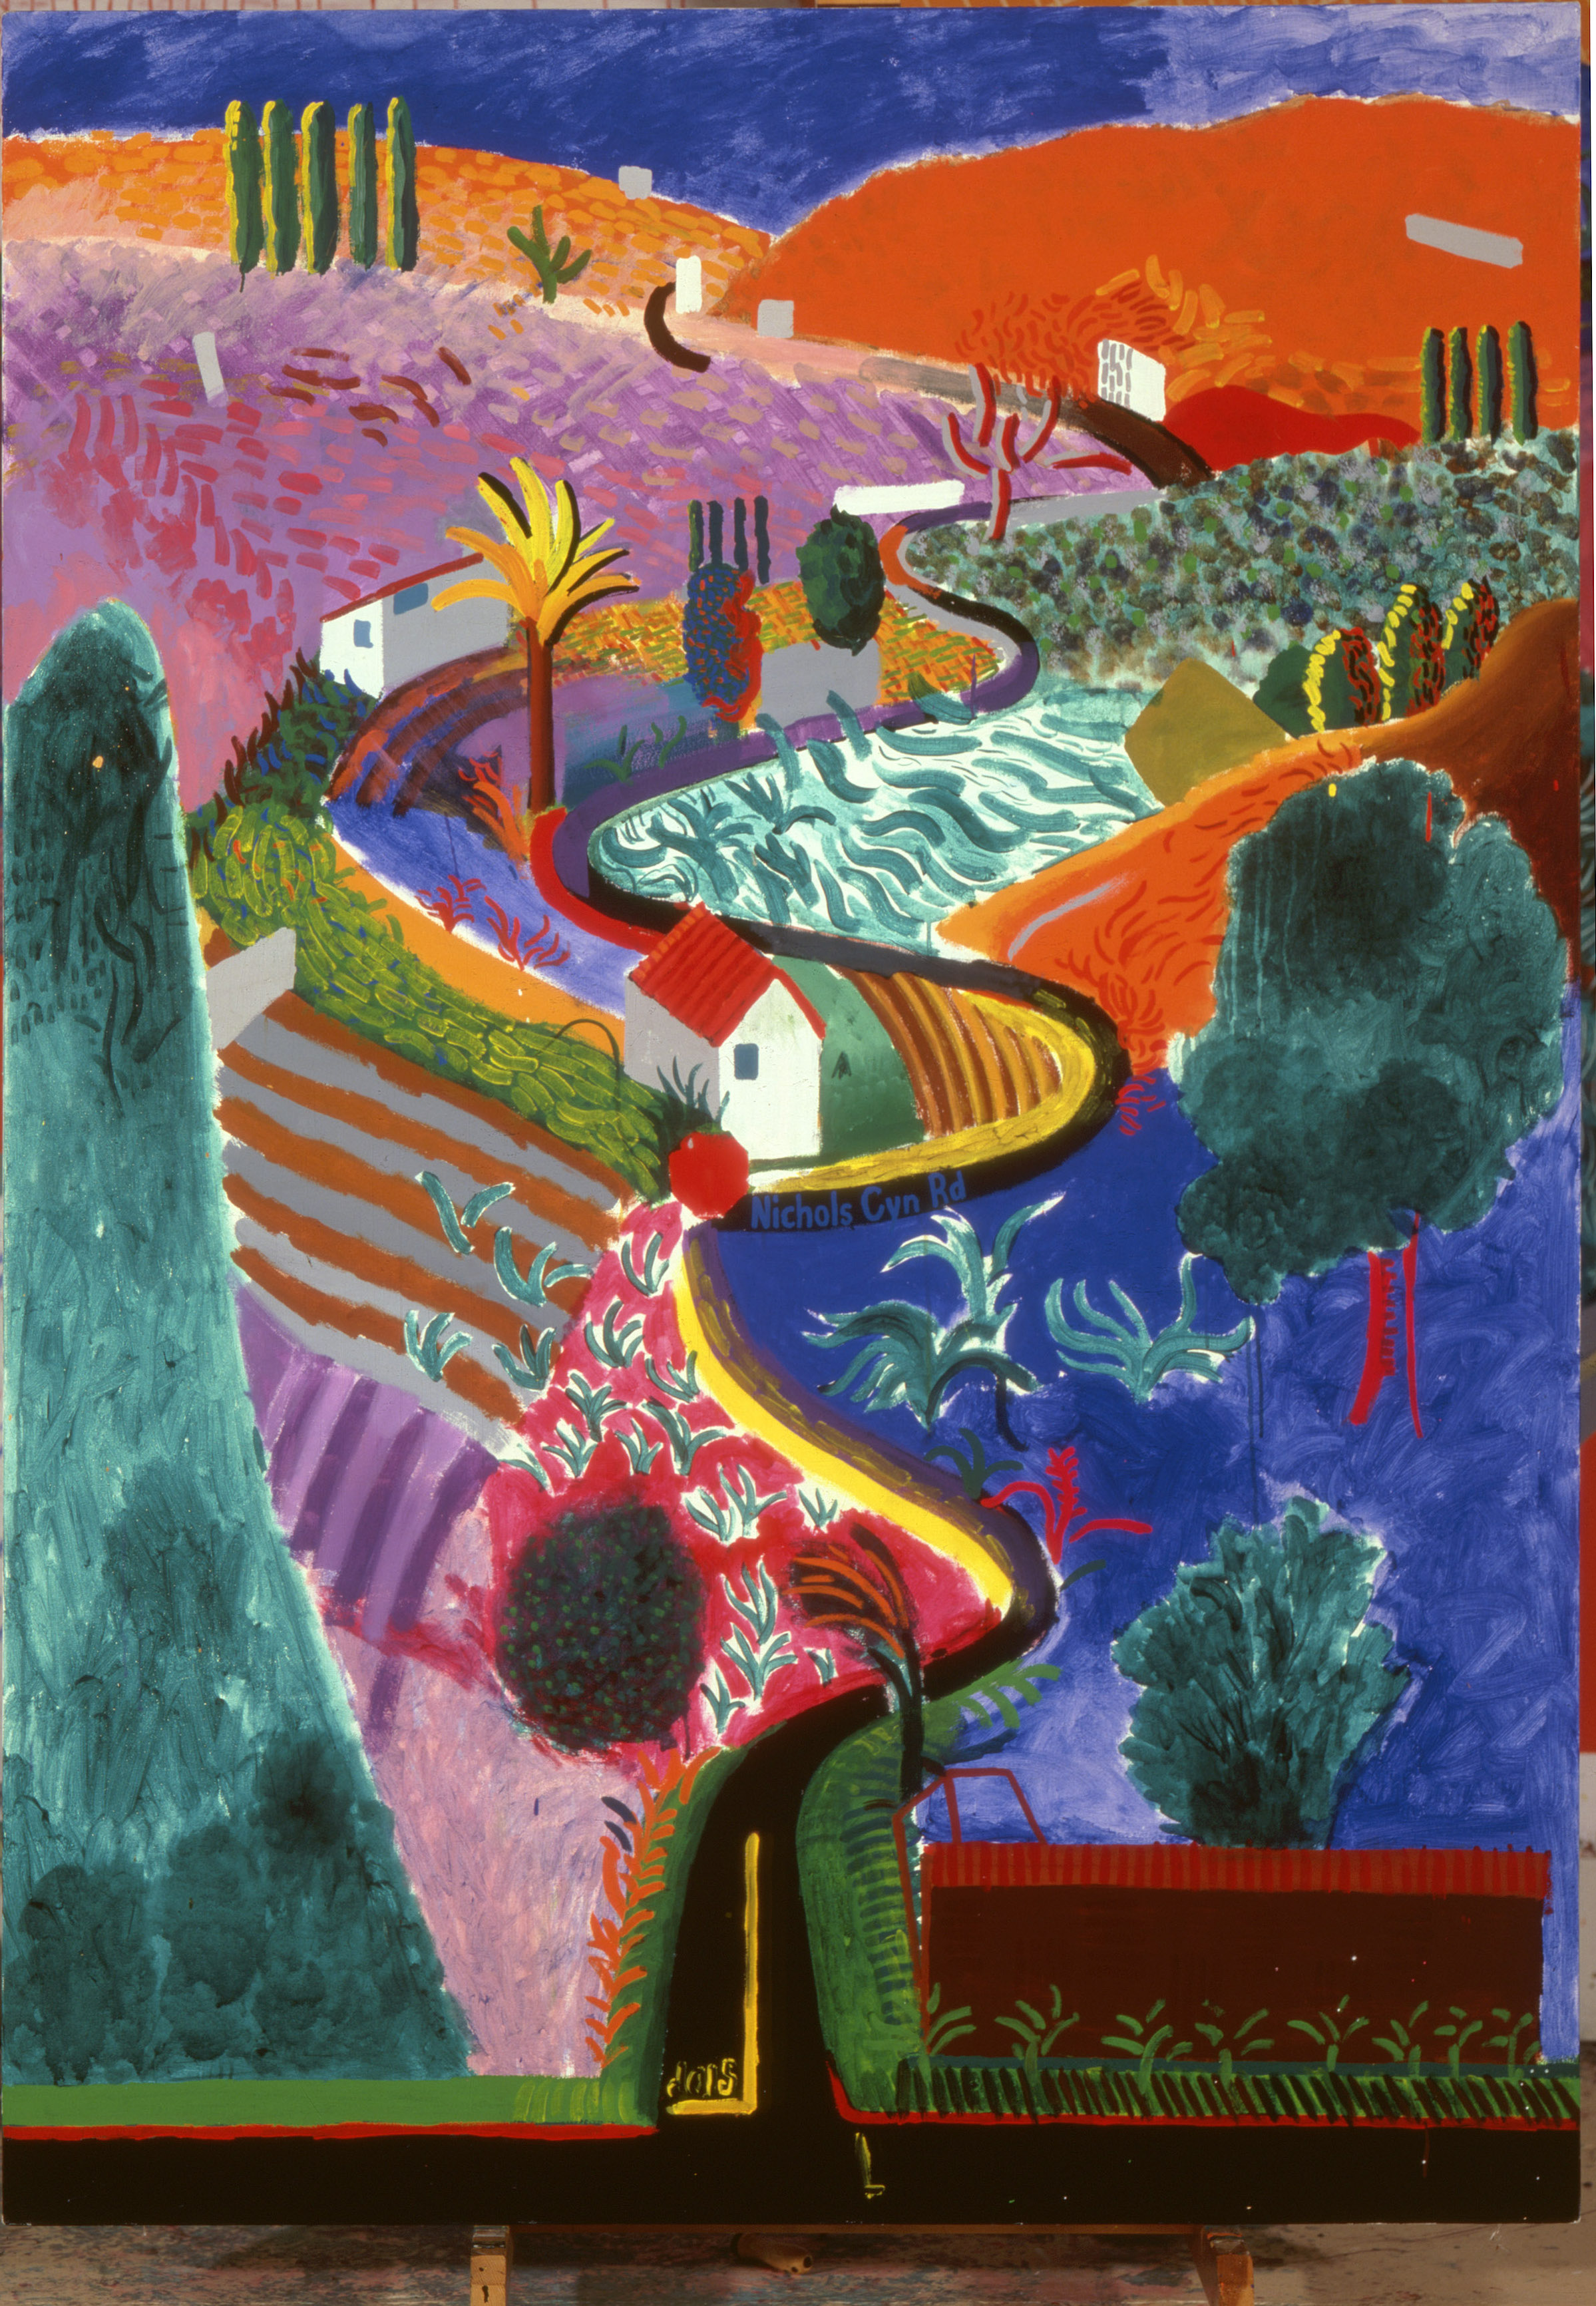 A landscape painting by David Hockney. It depicts a road winding into the distance through brightly colored hills and fields.